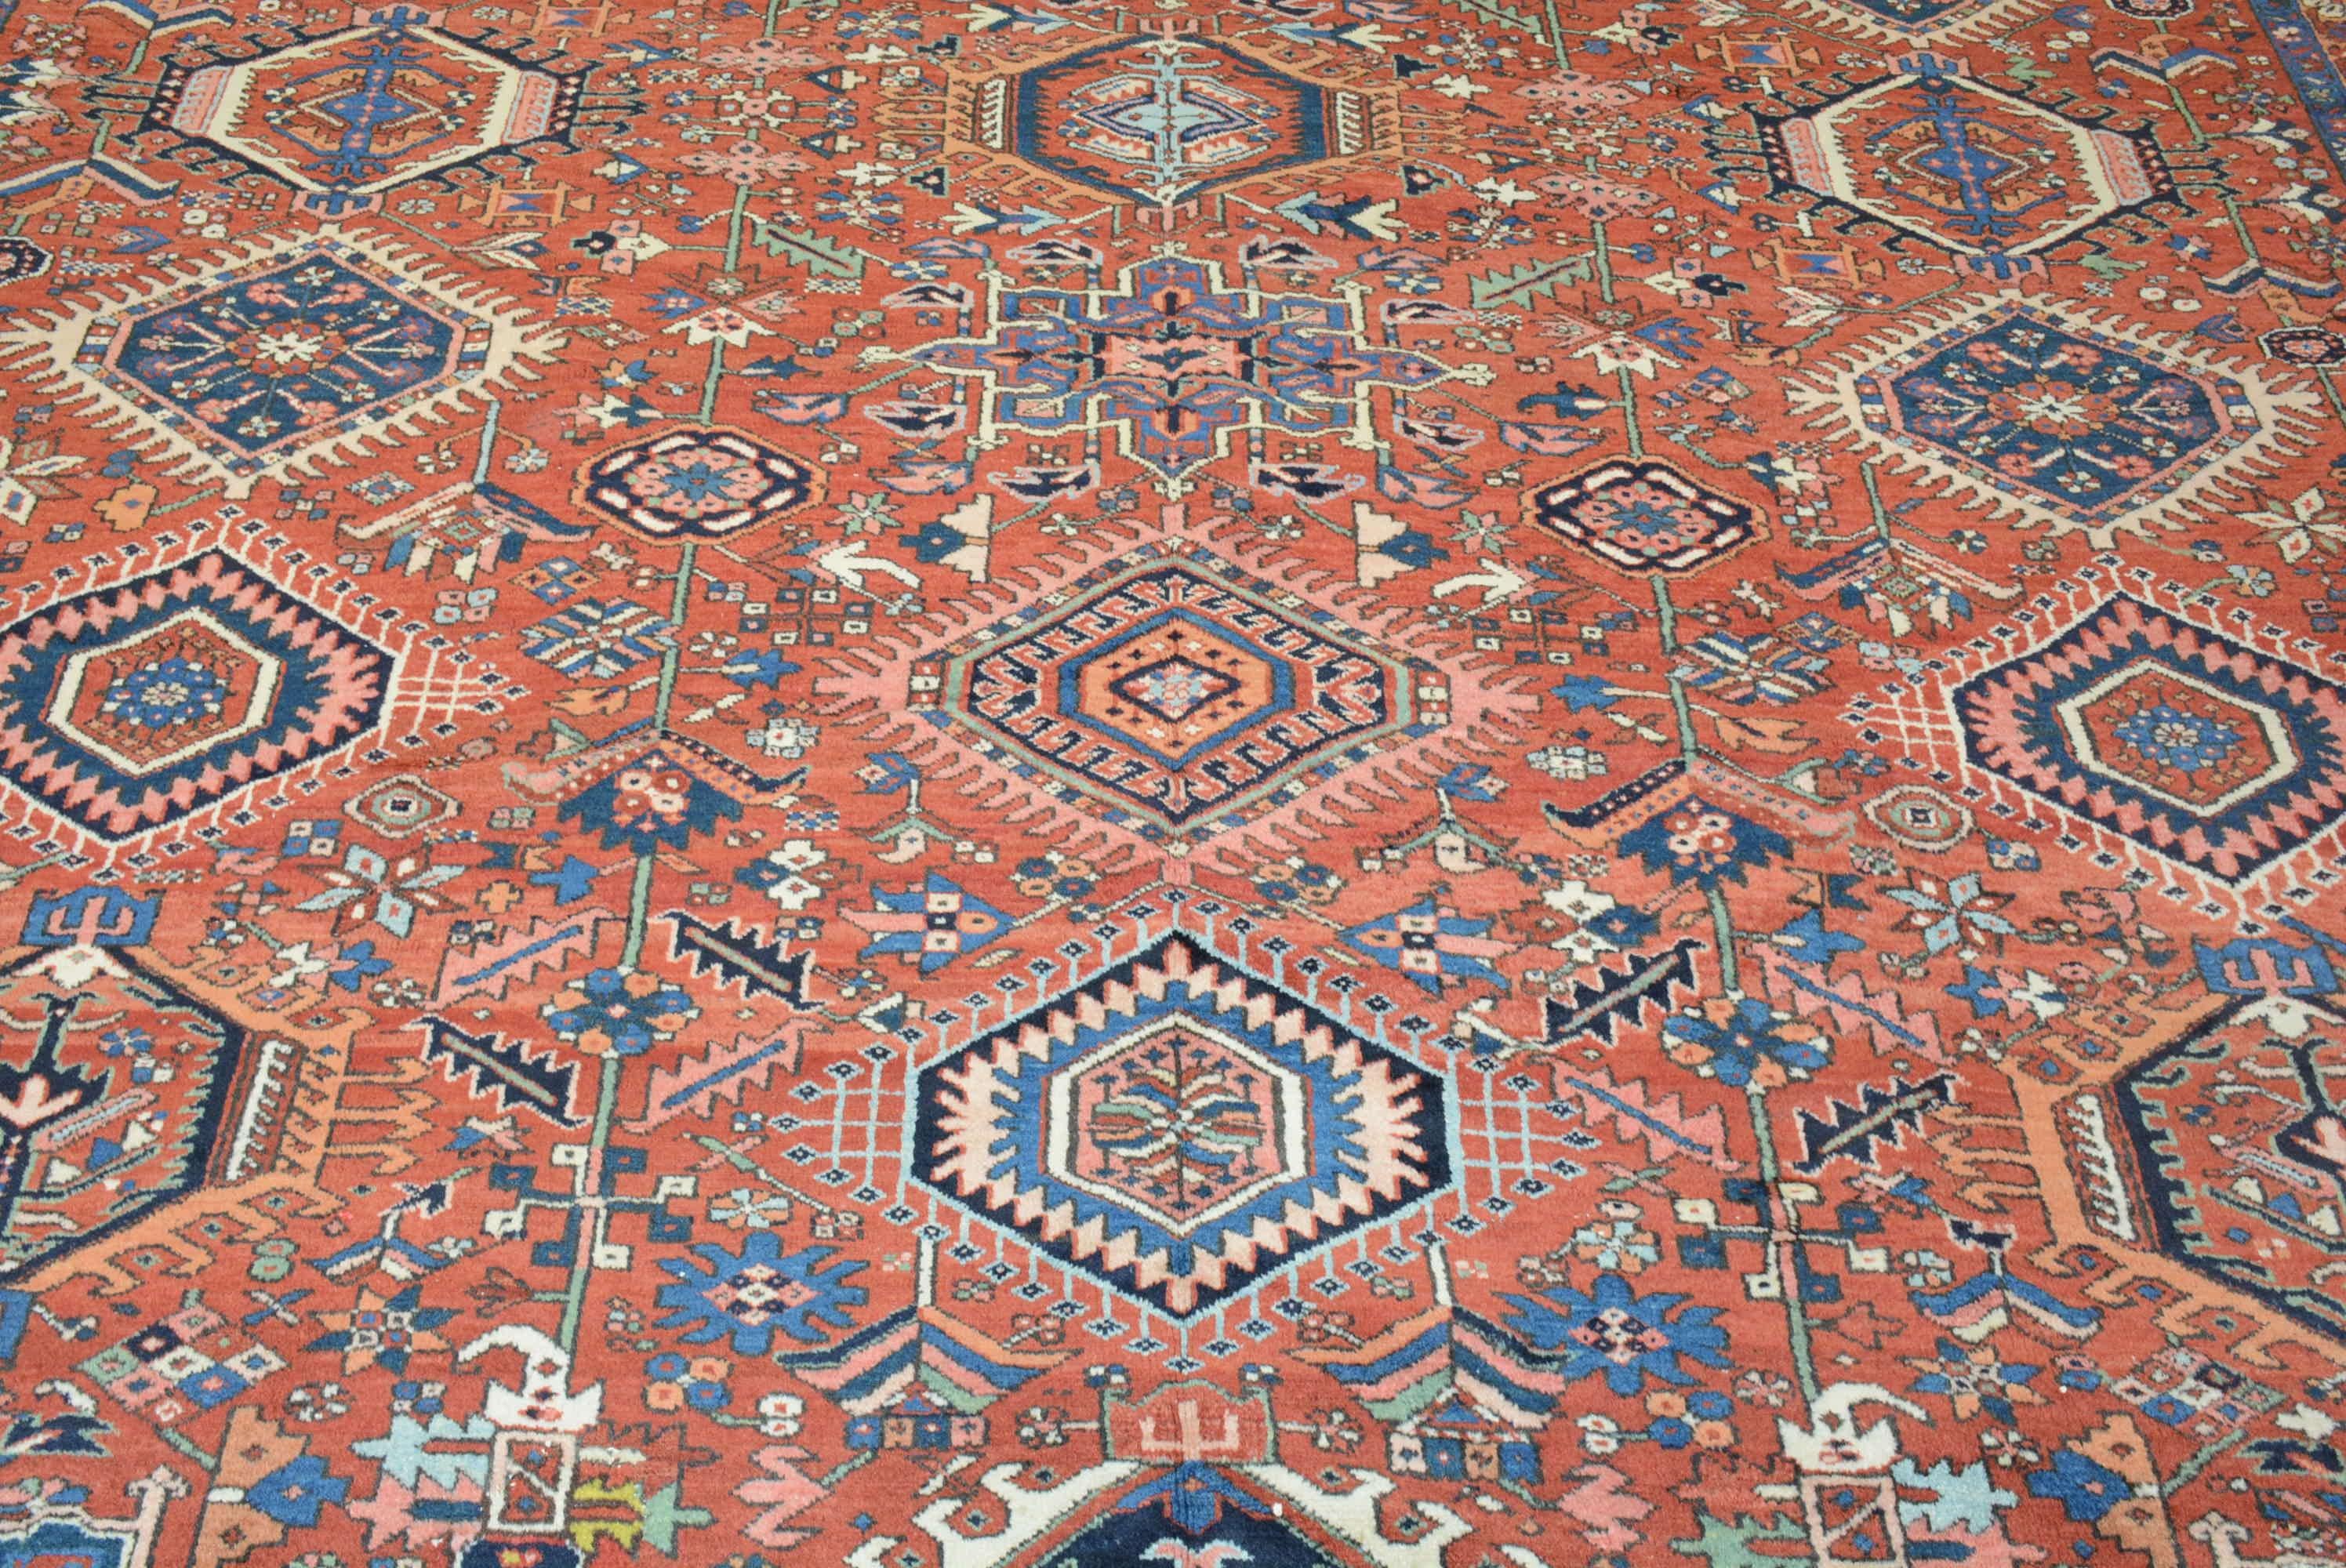 Persian Karadja carpets and runners are woven in the northwestern part of the country in a small village. These rugs are usually produced in runner formats, but room-size carpets are woven here as well. They are influenced by the designs and